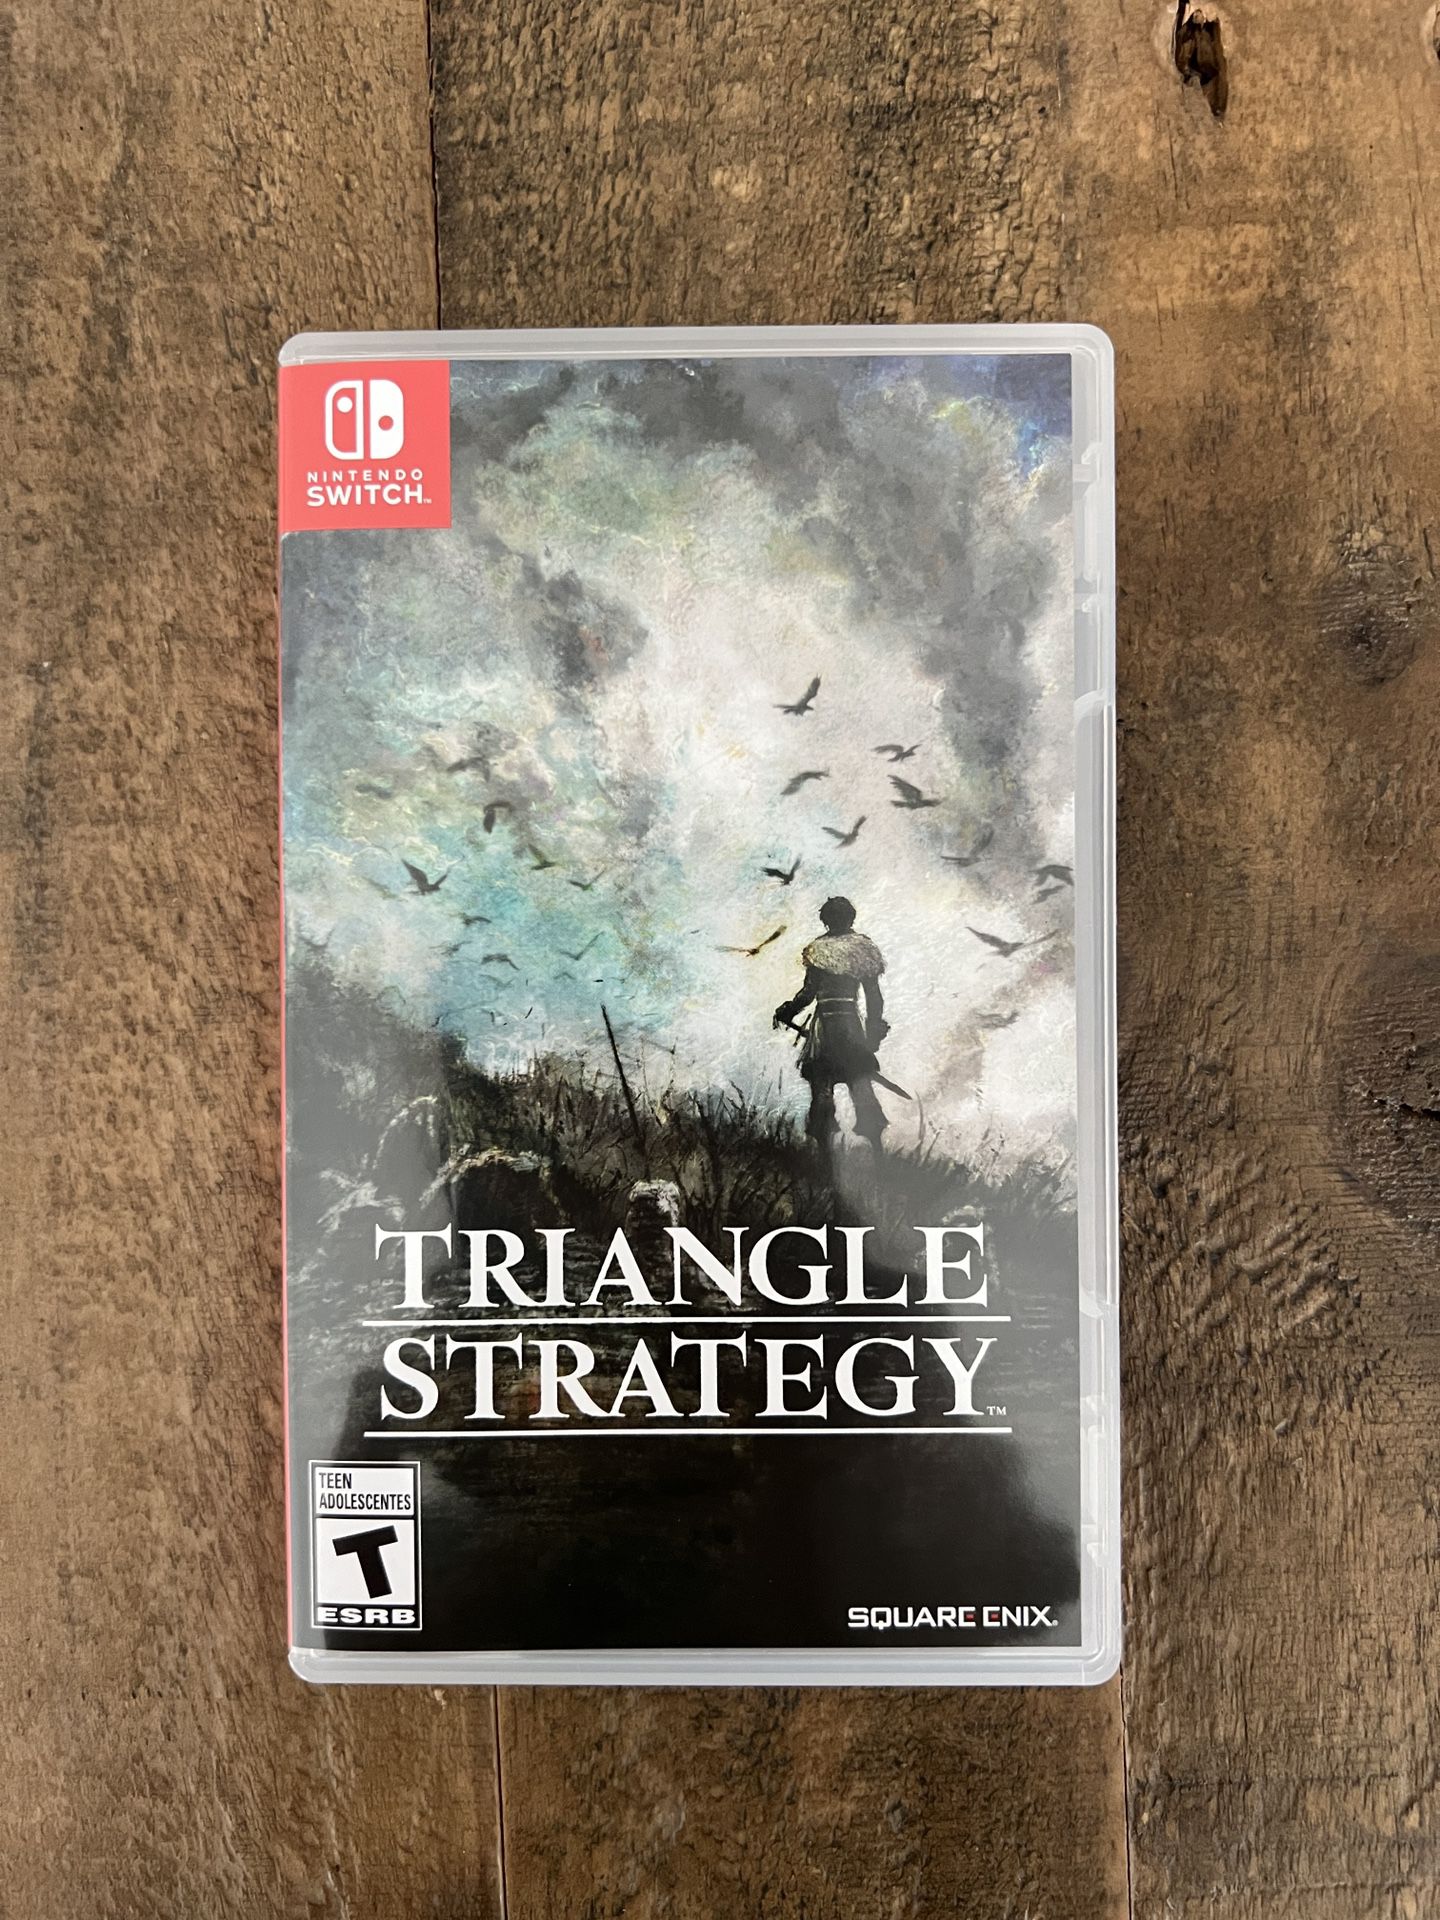 Sale for in Triangle Nintendo - FL OfferUp Strategy Miami, Switch